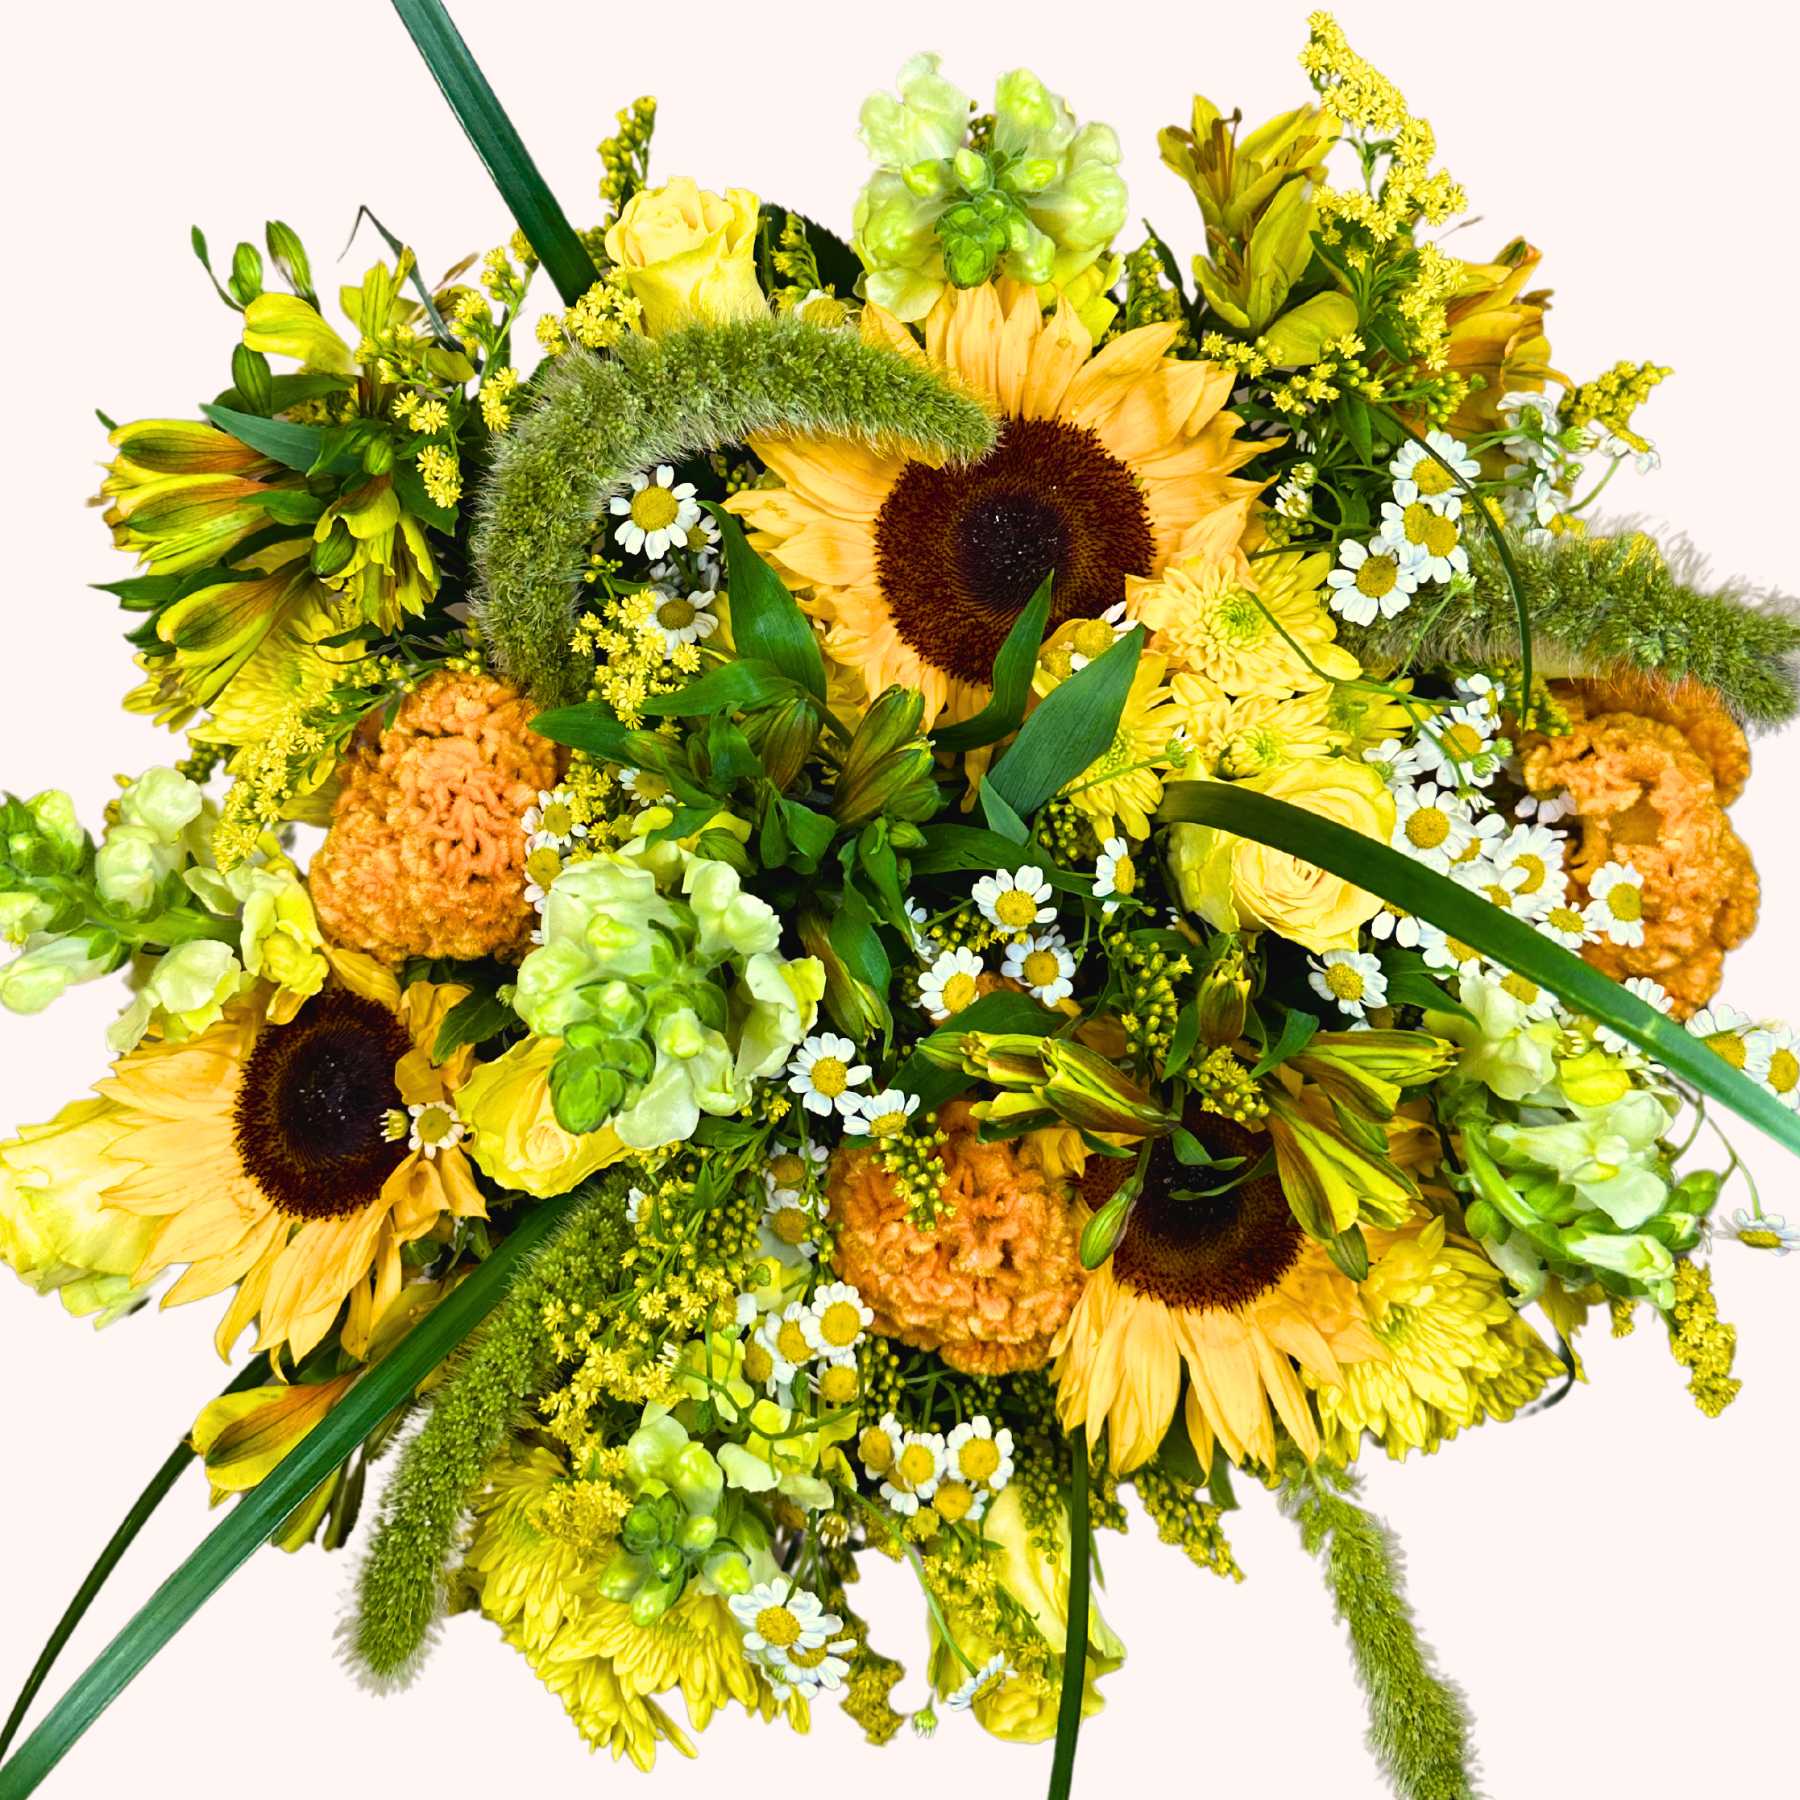 Natasha's Flower Bouquet, a vibrant arrangement featuring sunflowers, daisies, and yellow blooms, from Fabulous Flowers and Gifts.